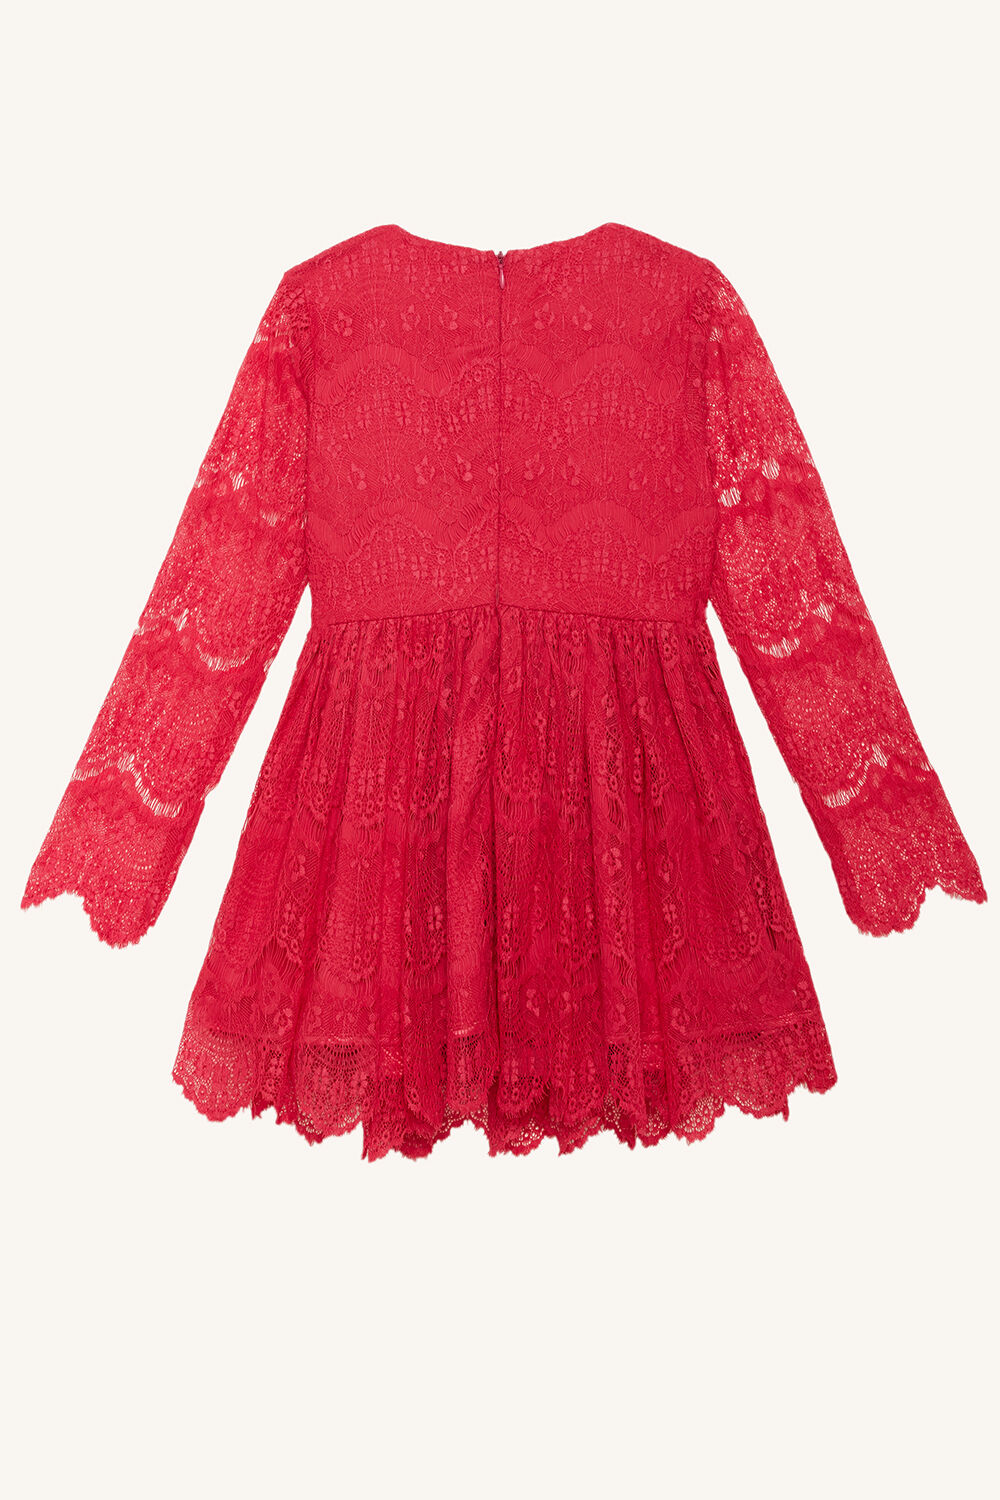 Junior Girl Gertrude Lace Dress in Pink